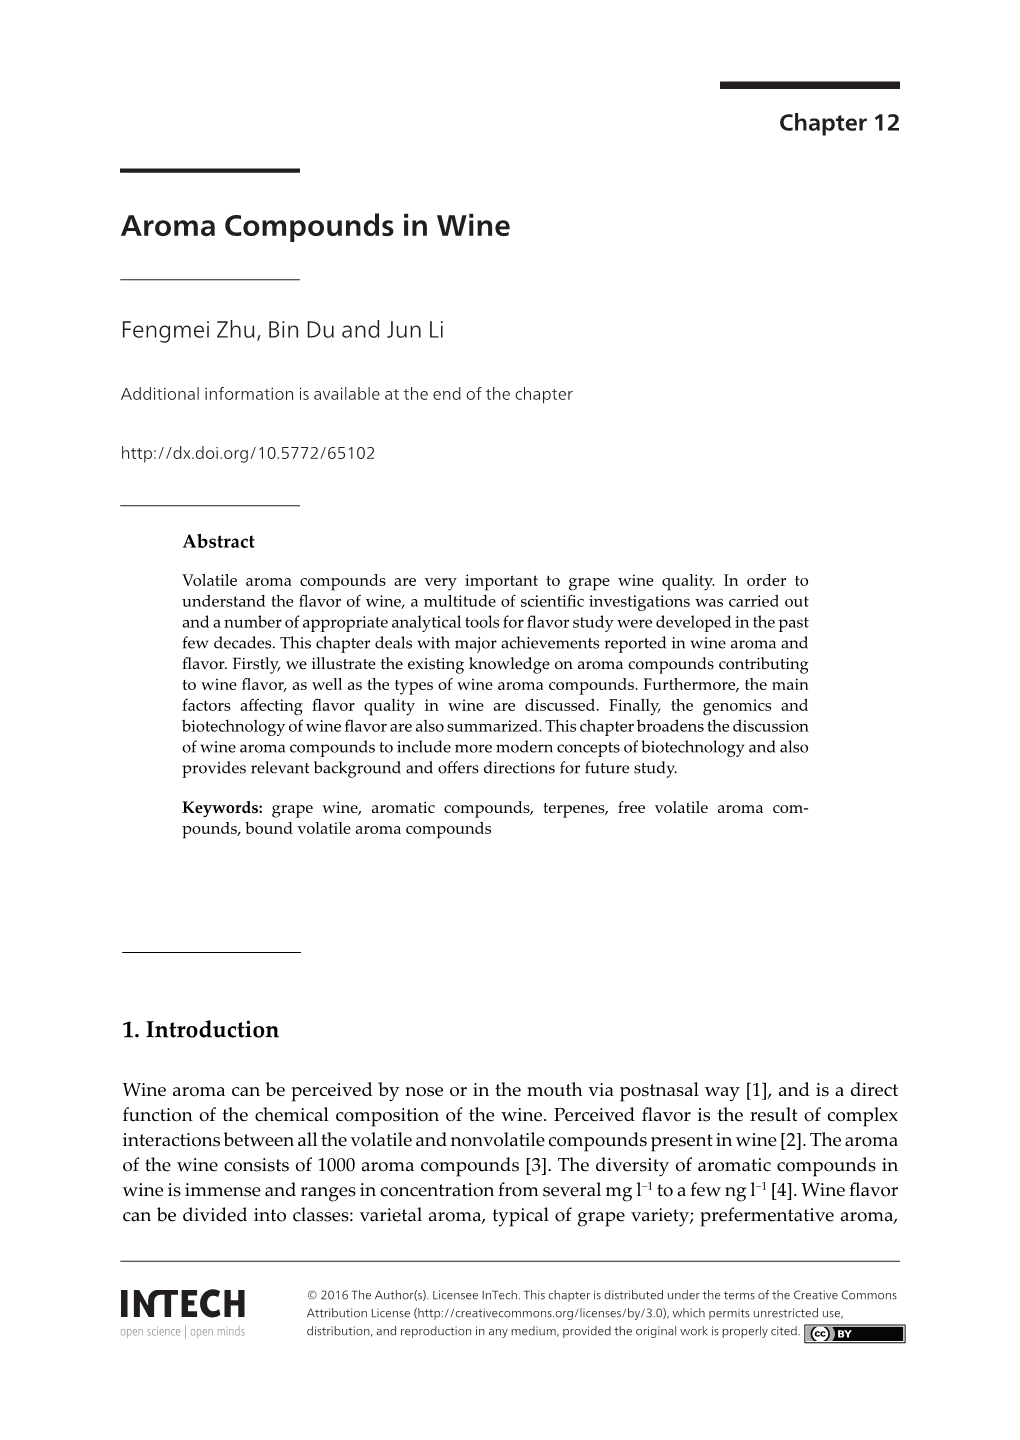 Aroma Compounds in Wine